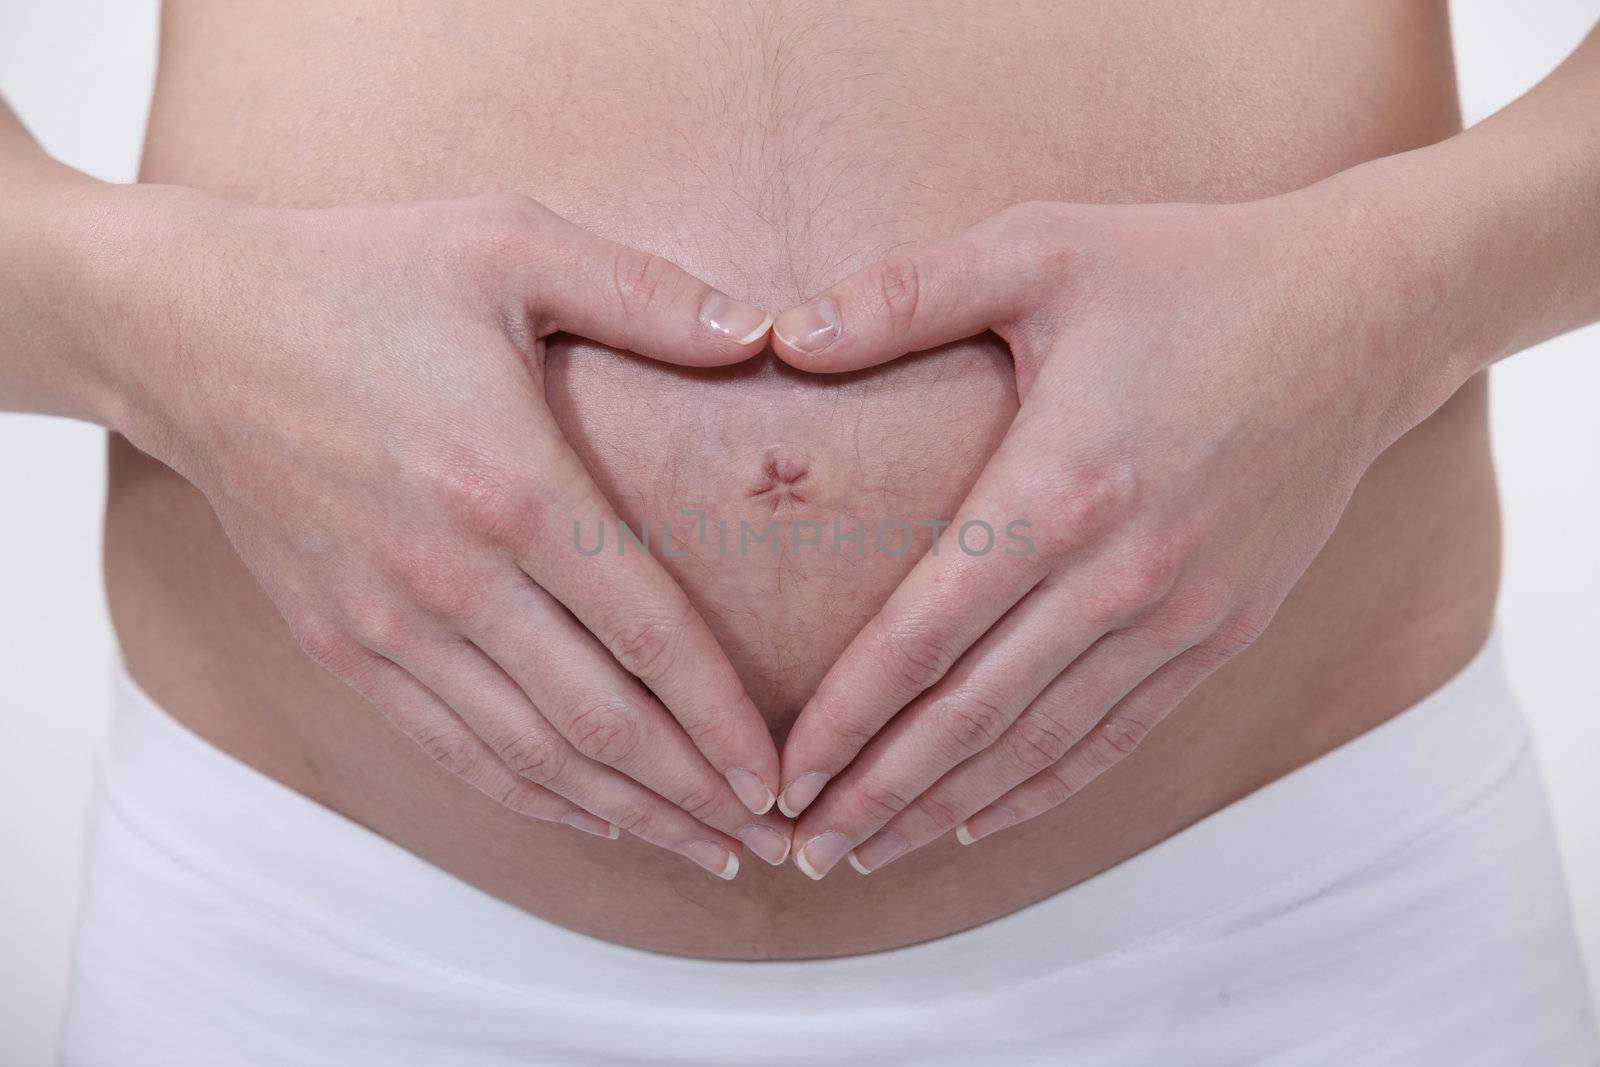 Pregnant woman making a heart shape on her stomach